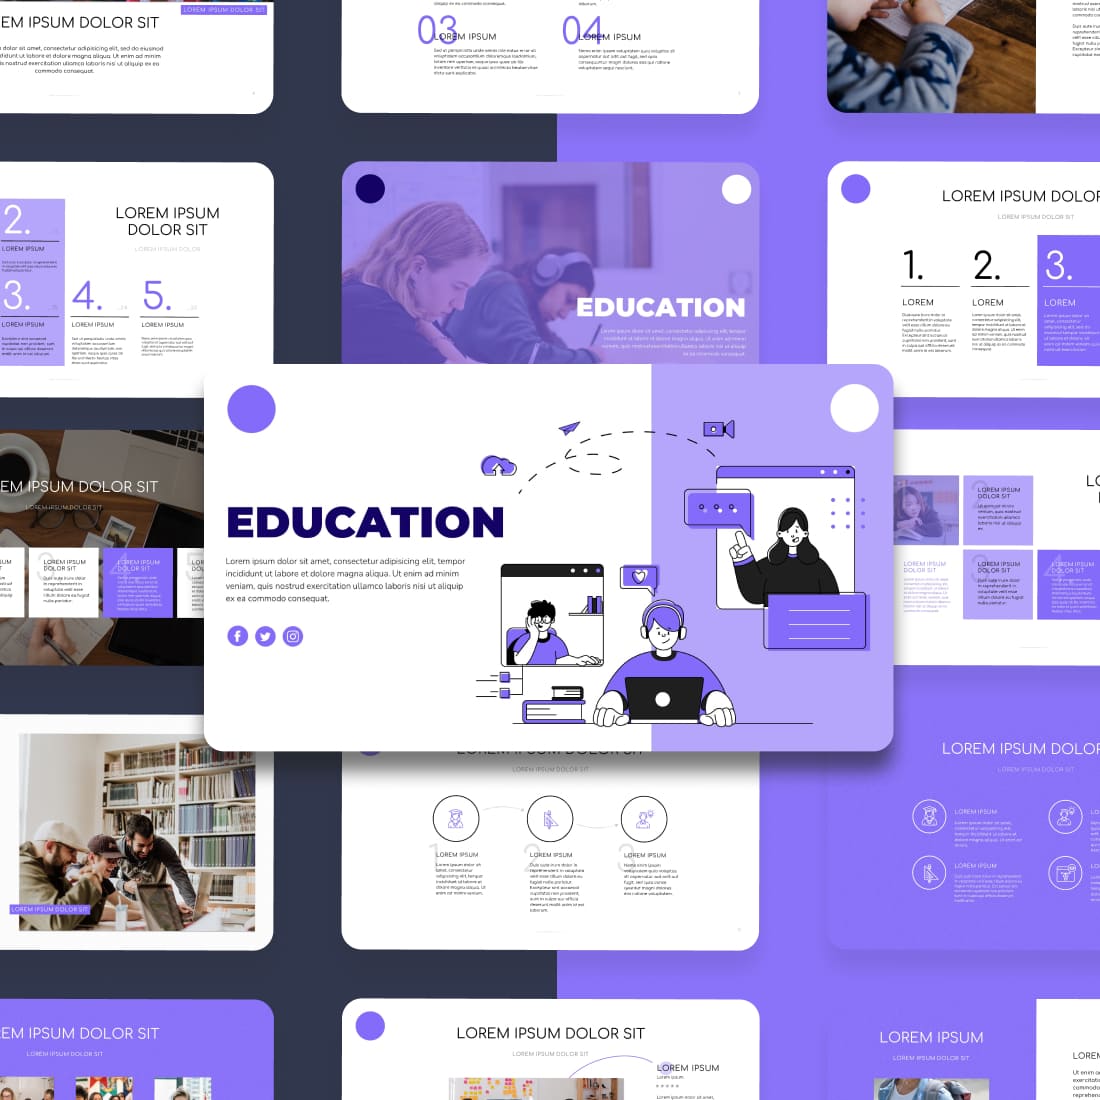 Education Keynote Template: 50 Slides cover.